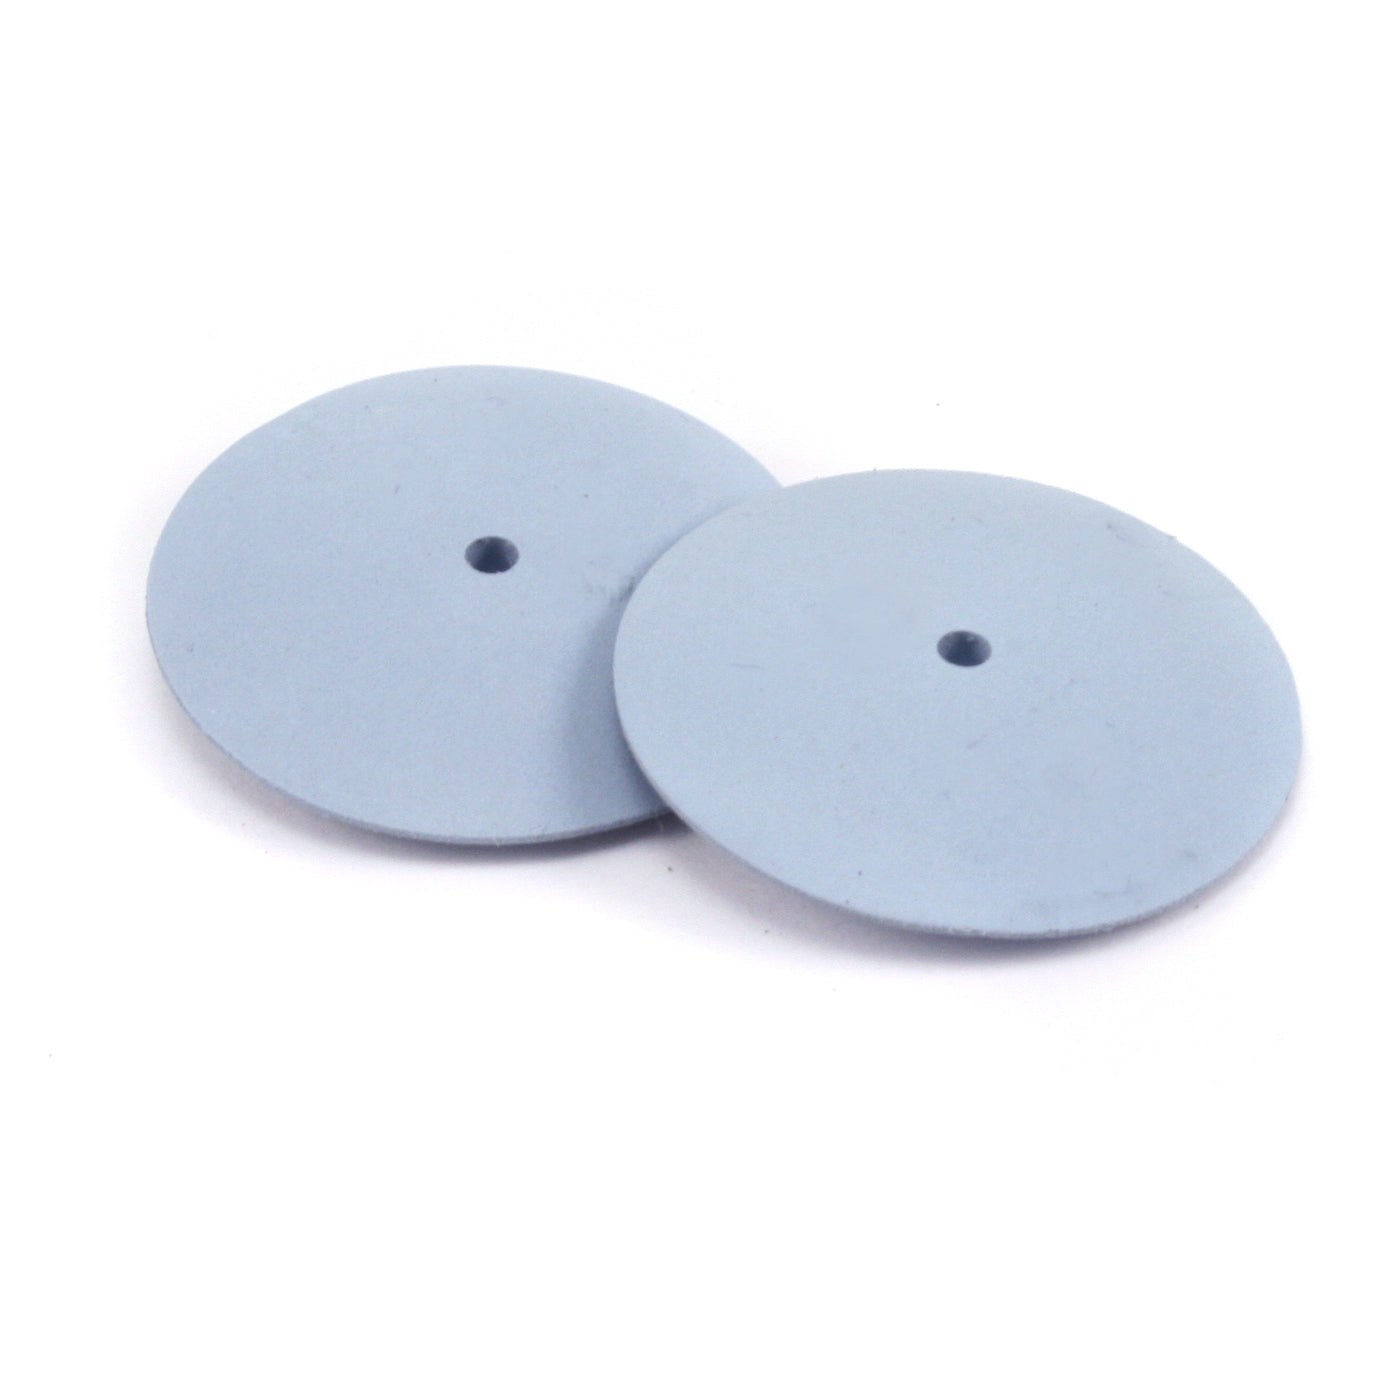 Pacific Silicone Wheels SG-1 Pre-Polishing Wheel For Porcelain 22mm - 100  Count